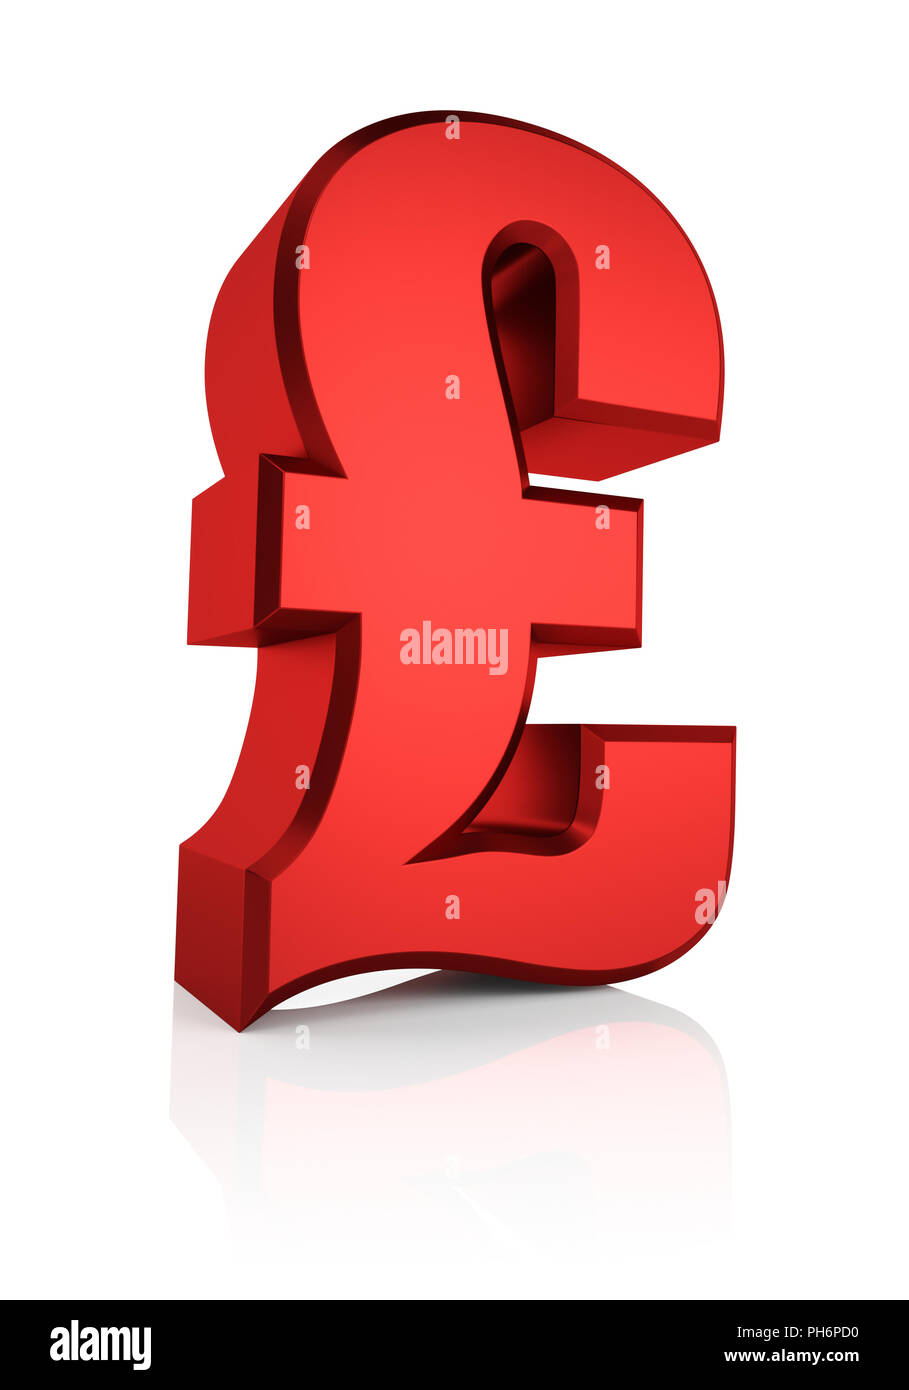 3D Red Pound Sign Stock Photo